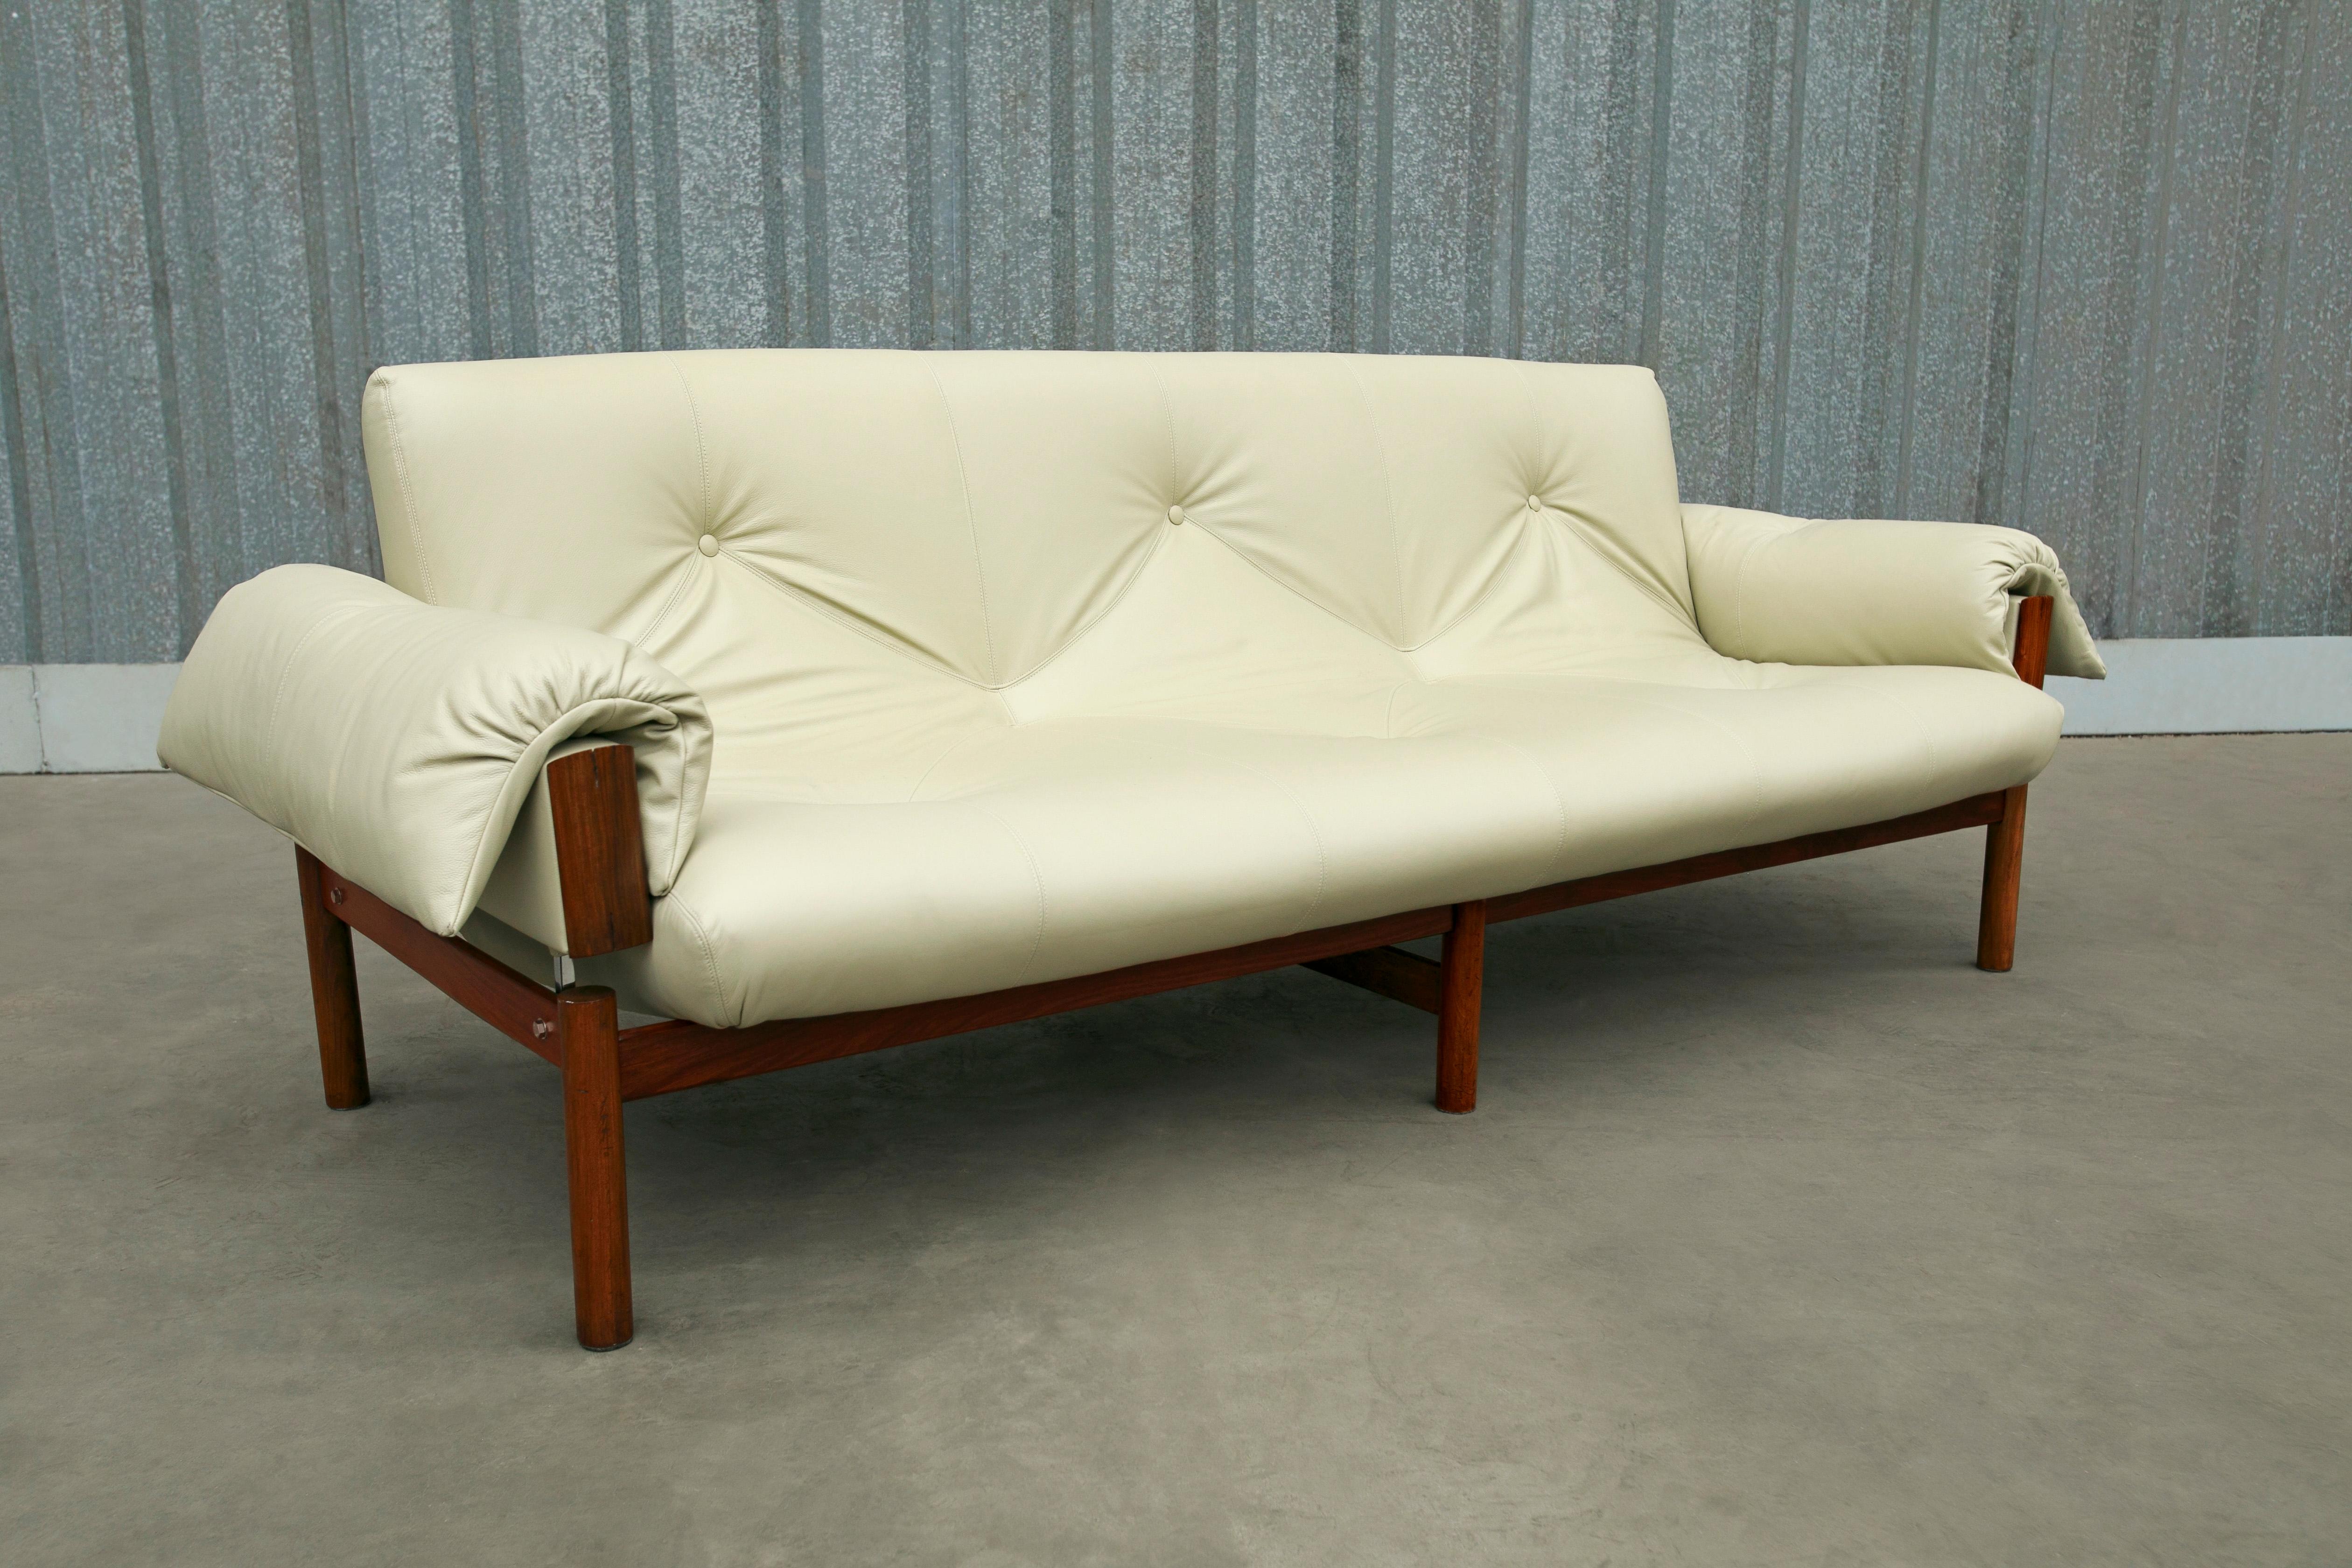 Available today, this Brazilian Modern sofa, model MP-13, designed by Percival Lafer in Hardwood and Beige Italian leather, 1960s is nothing less than fabulous! 

This spectacular sofa fits three comfortably and features a Brazilian Rosewood